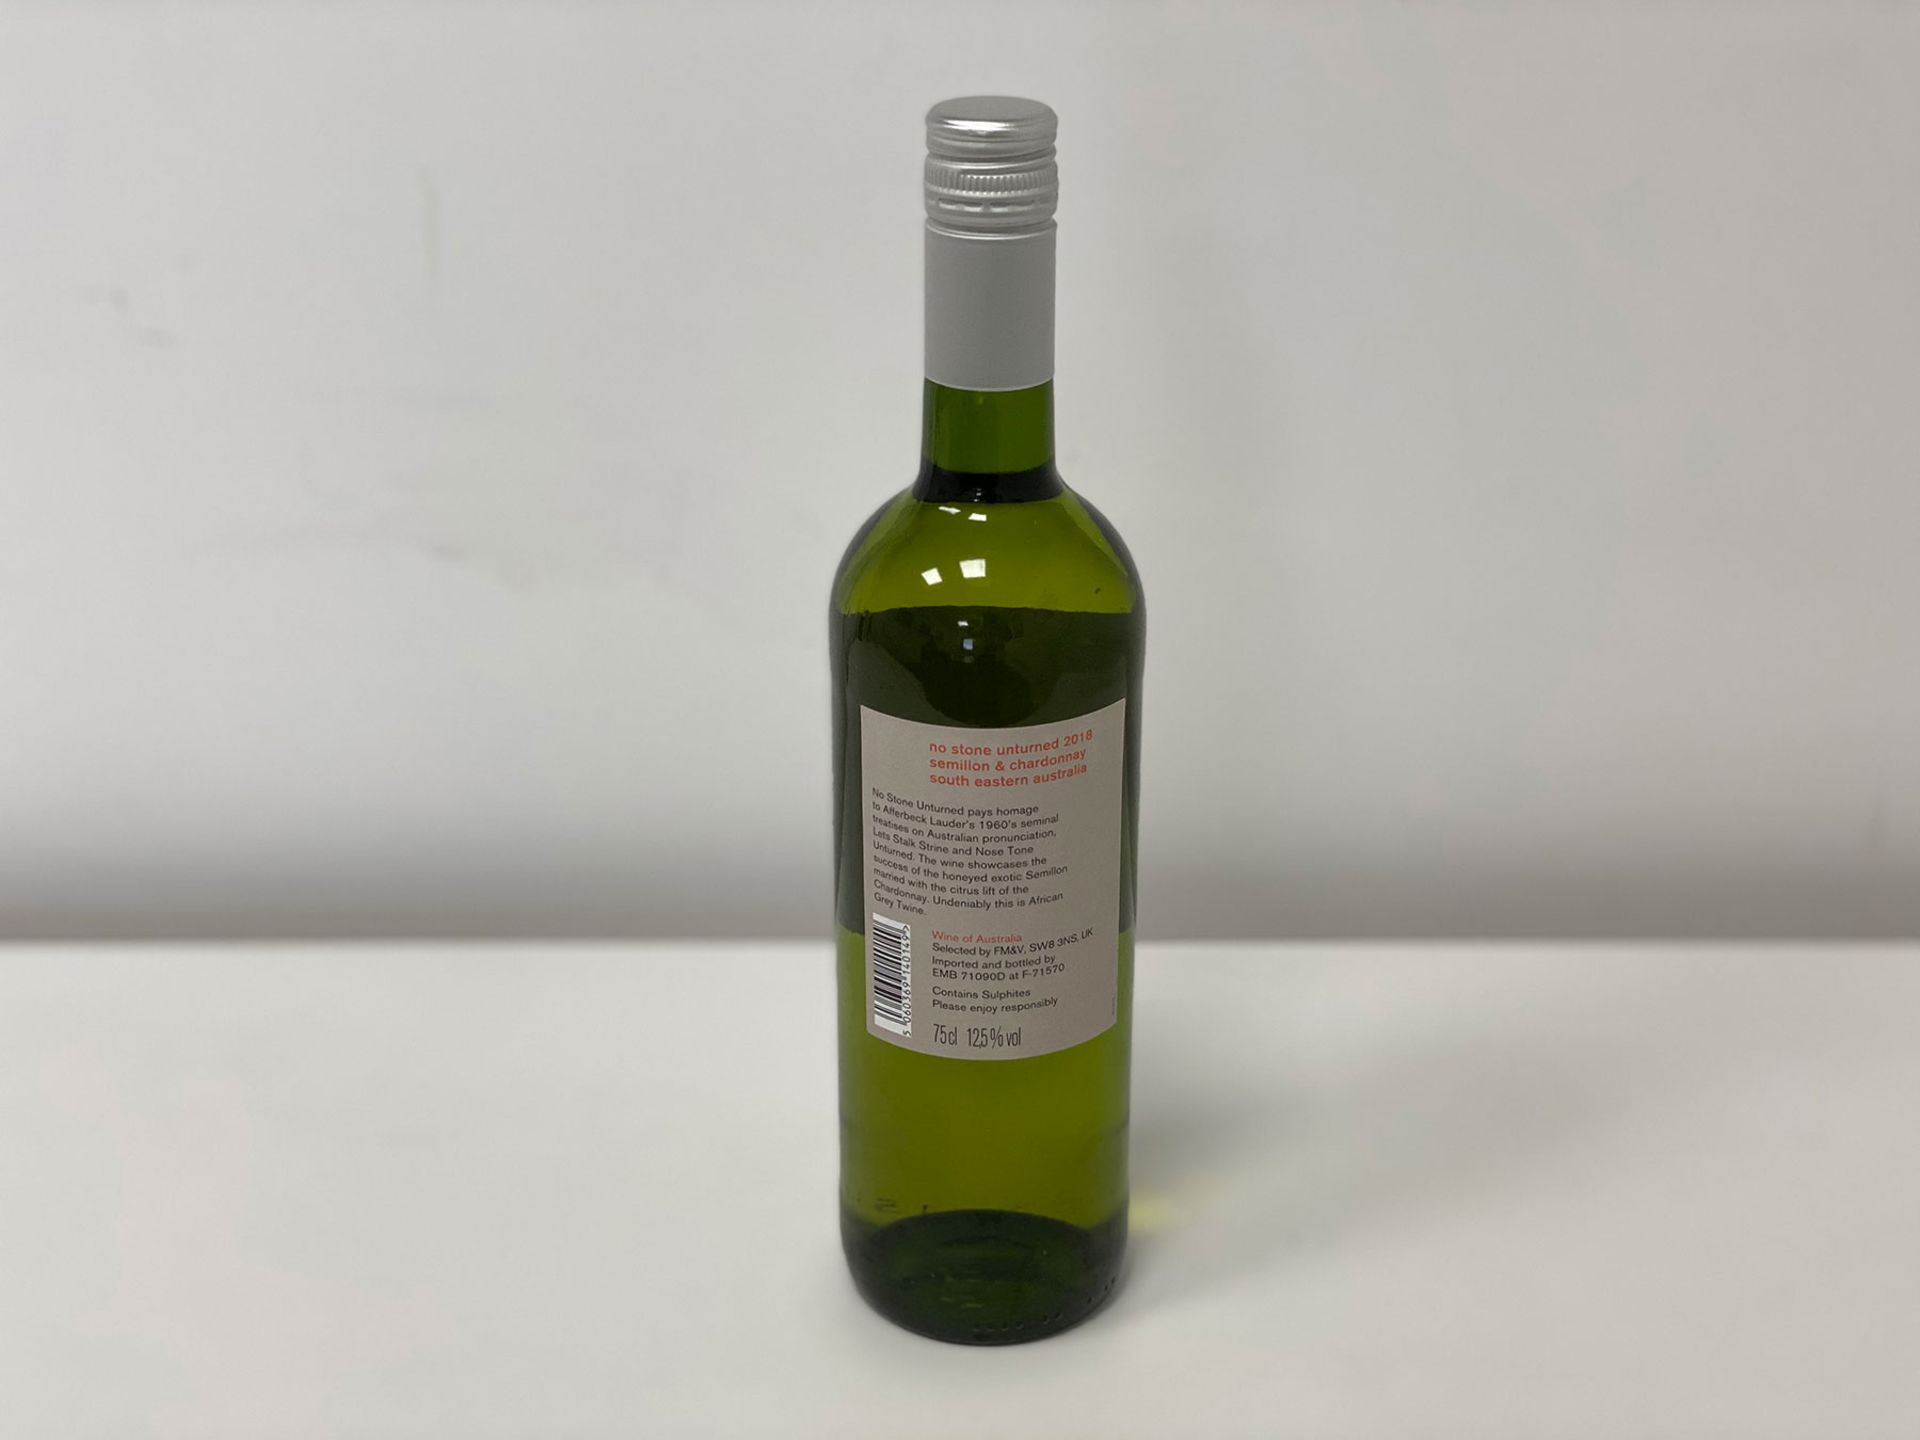 30 Bottles (5 Cases) Paul Sapin - No Stone Unturned - SÃ©millon and Chardonnay - Murray Darling - Image 2 of 2